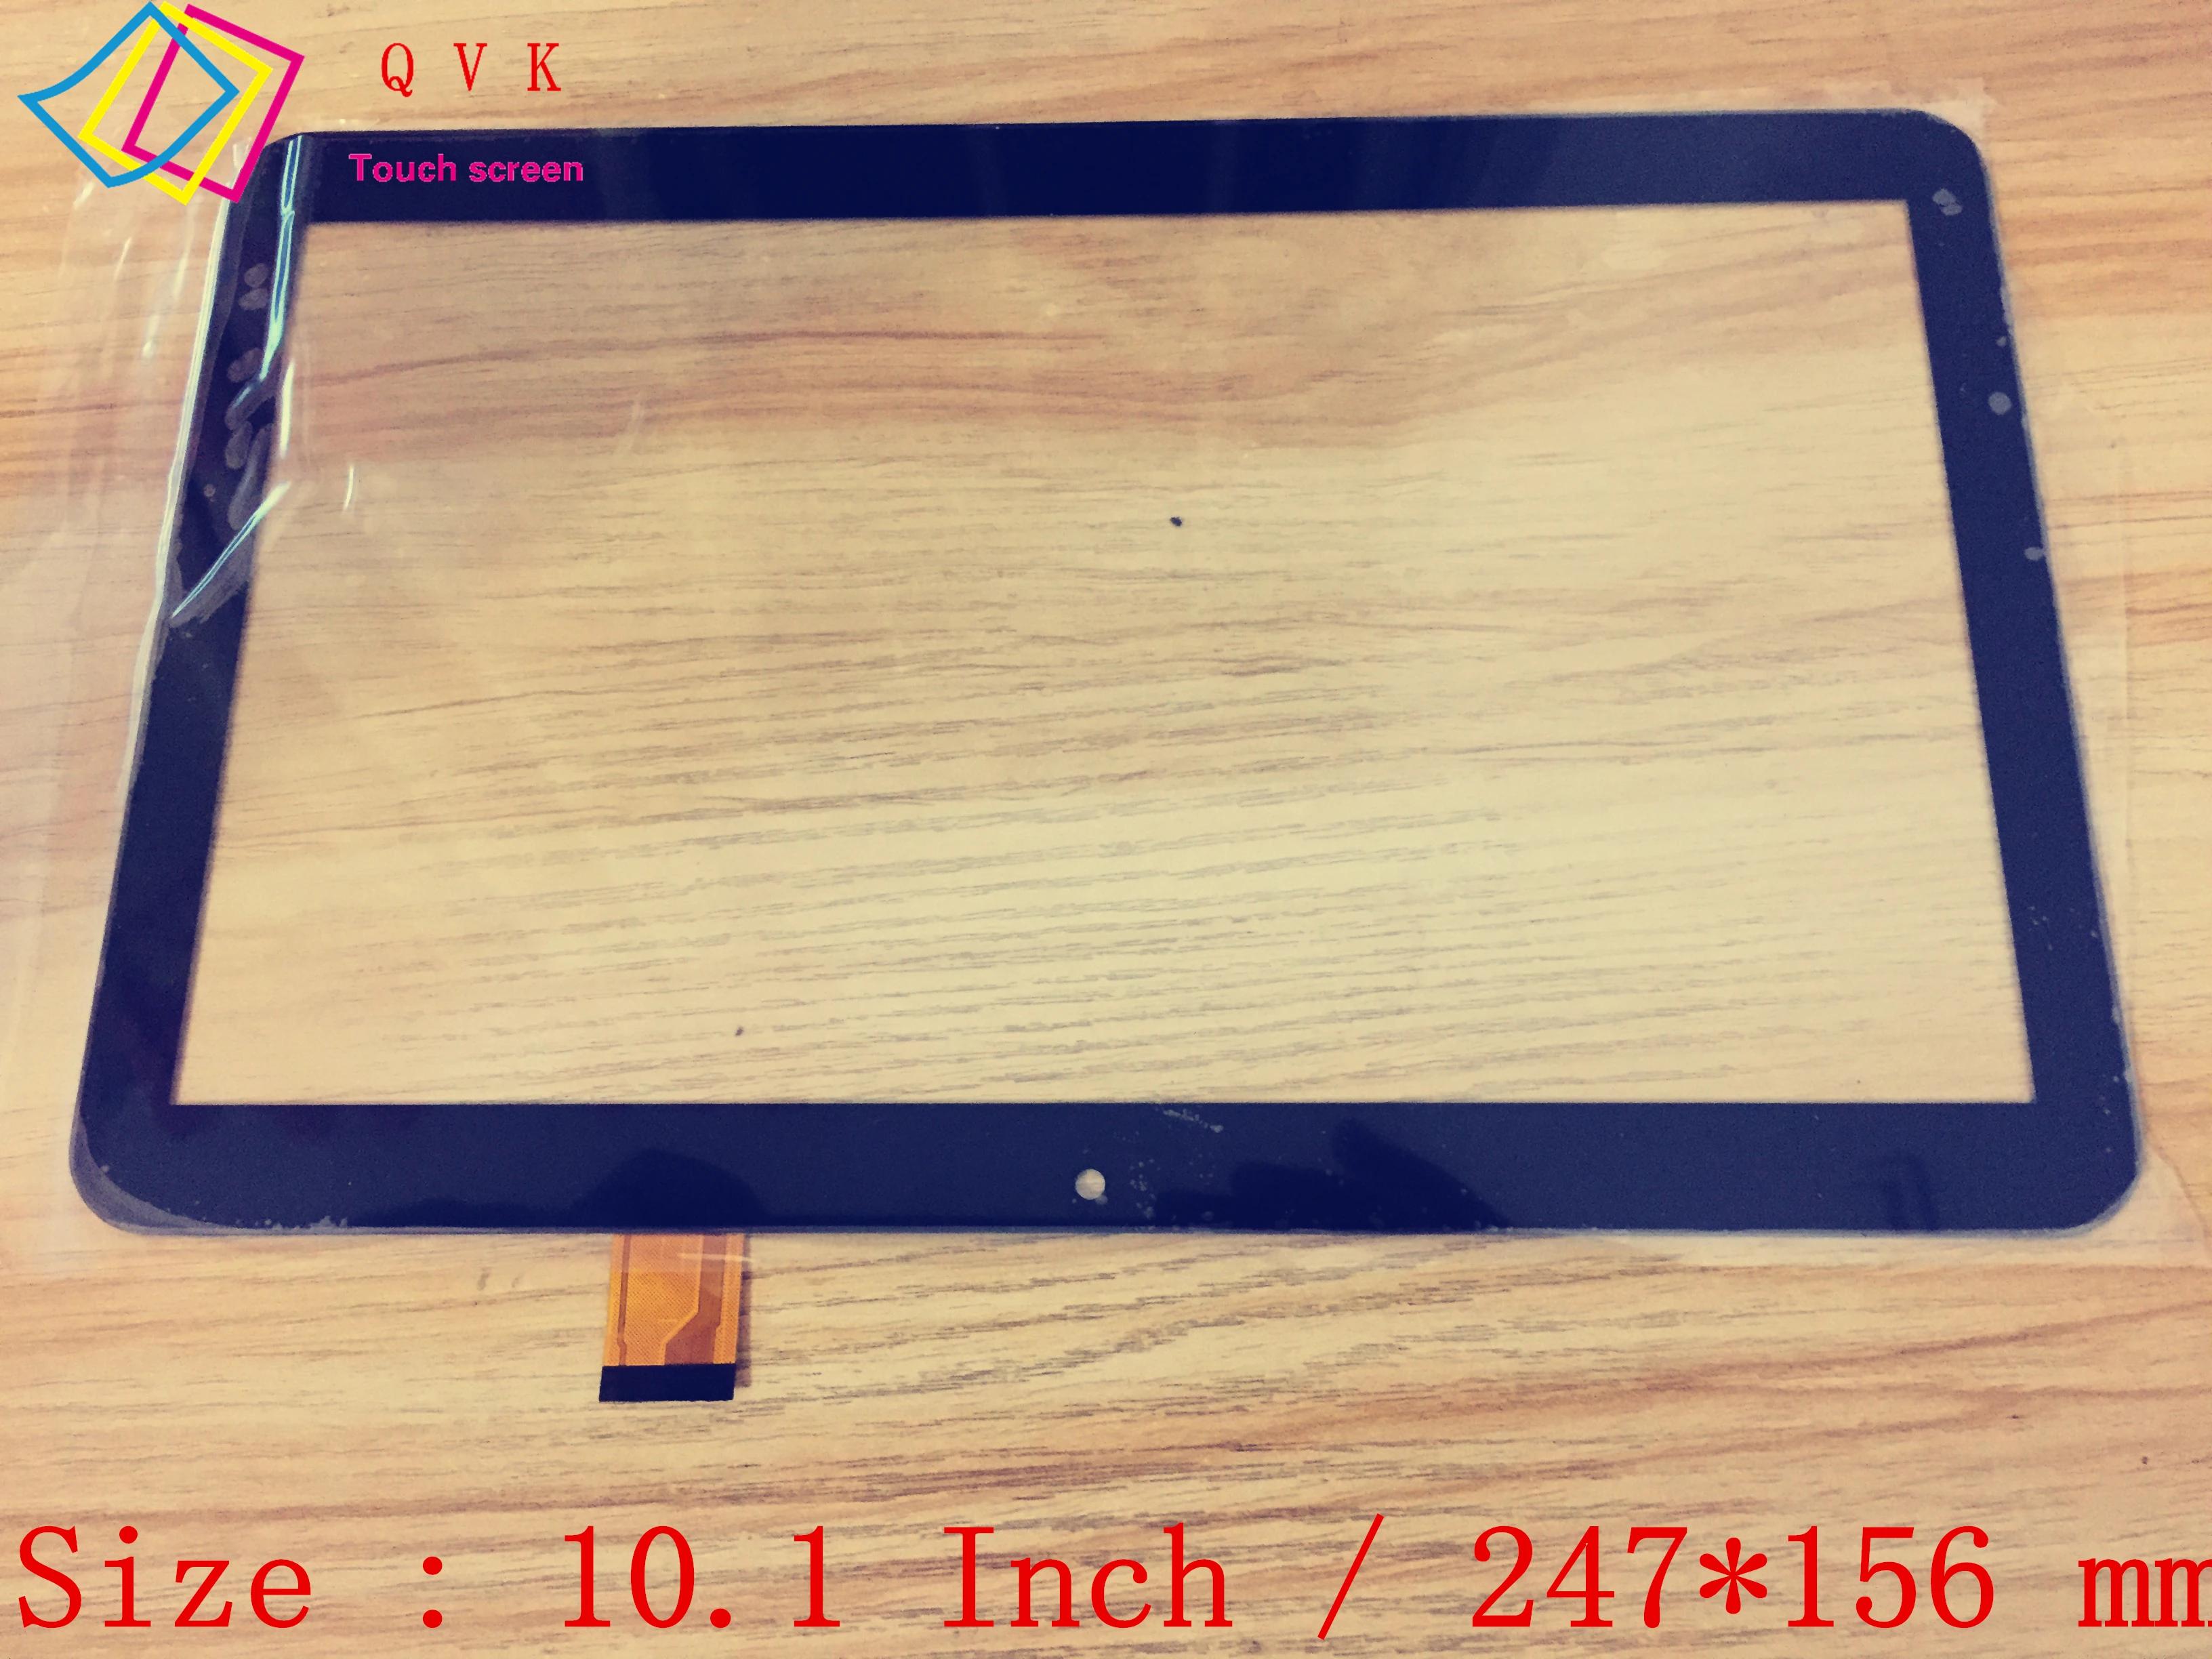 

Black 10.1 Inch for Irbis TZ143 TZ 143 3G tablet pc capacitive touch screen glass digitizer panel Free shipping